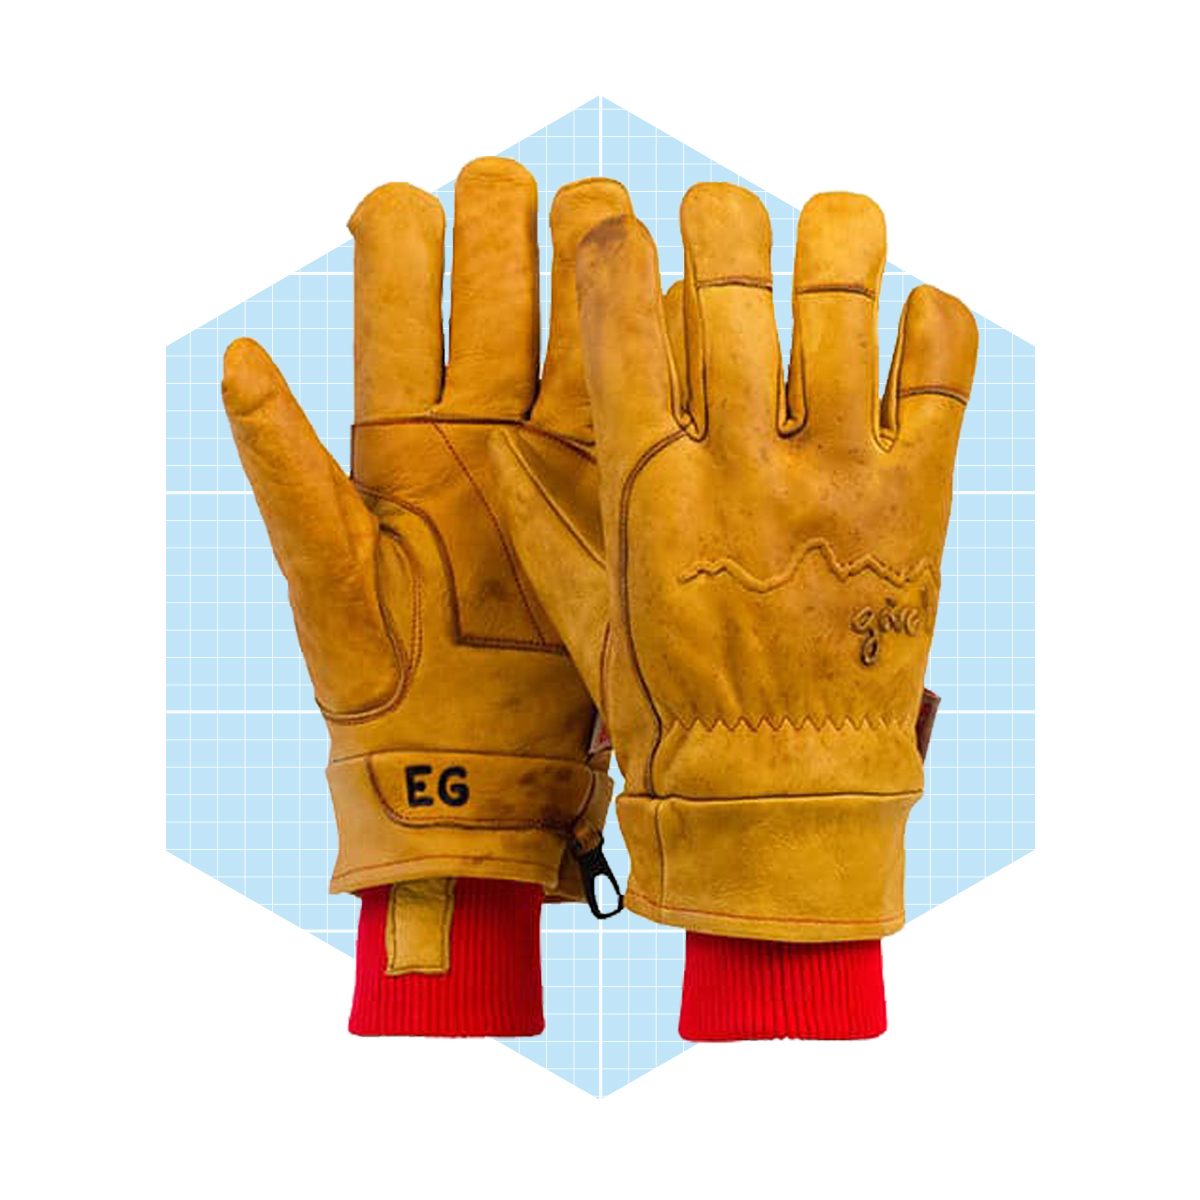 4 Season Give'r Gloves Regular Price Ecomm Give R.com